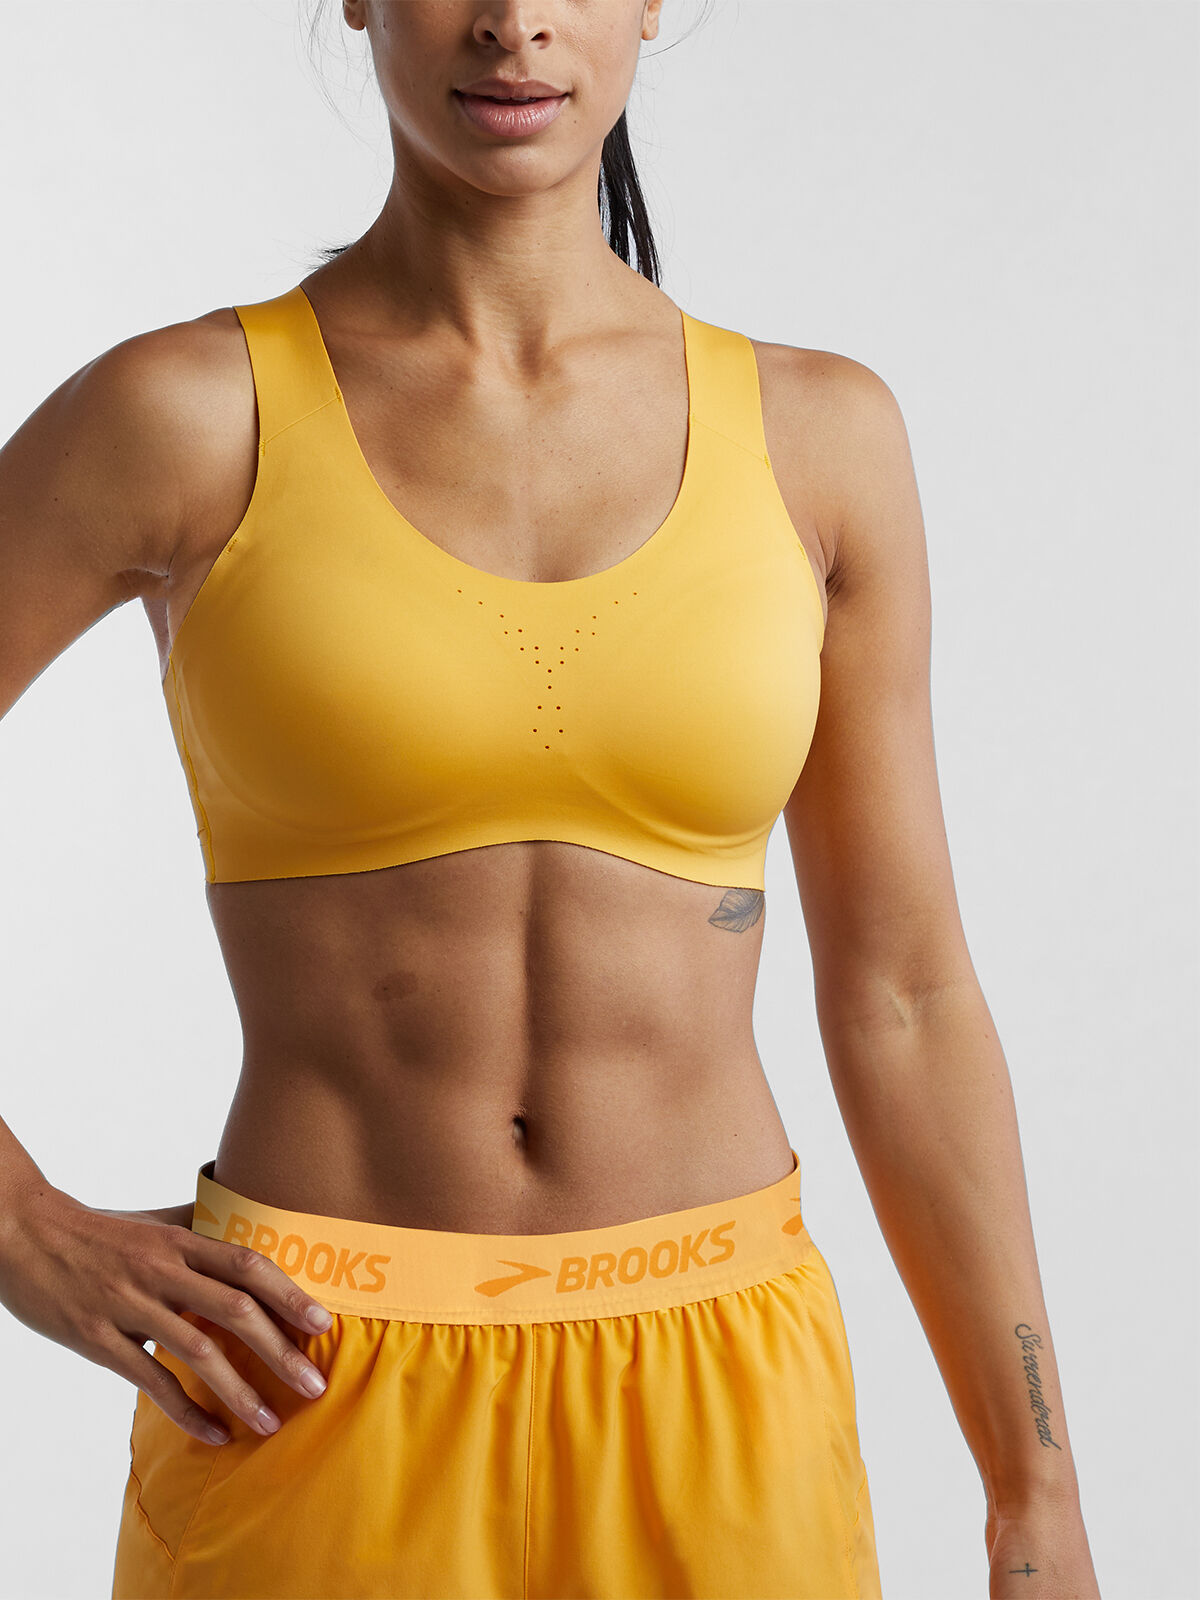 solid tech athena sports bra by moving comfort for title nine